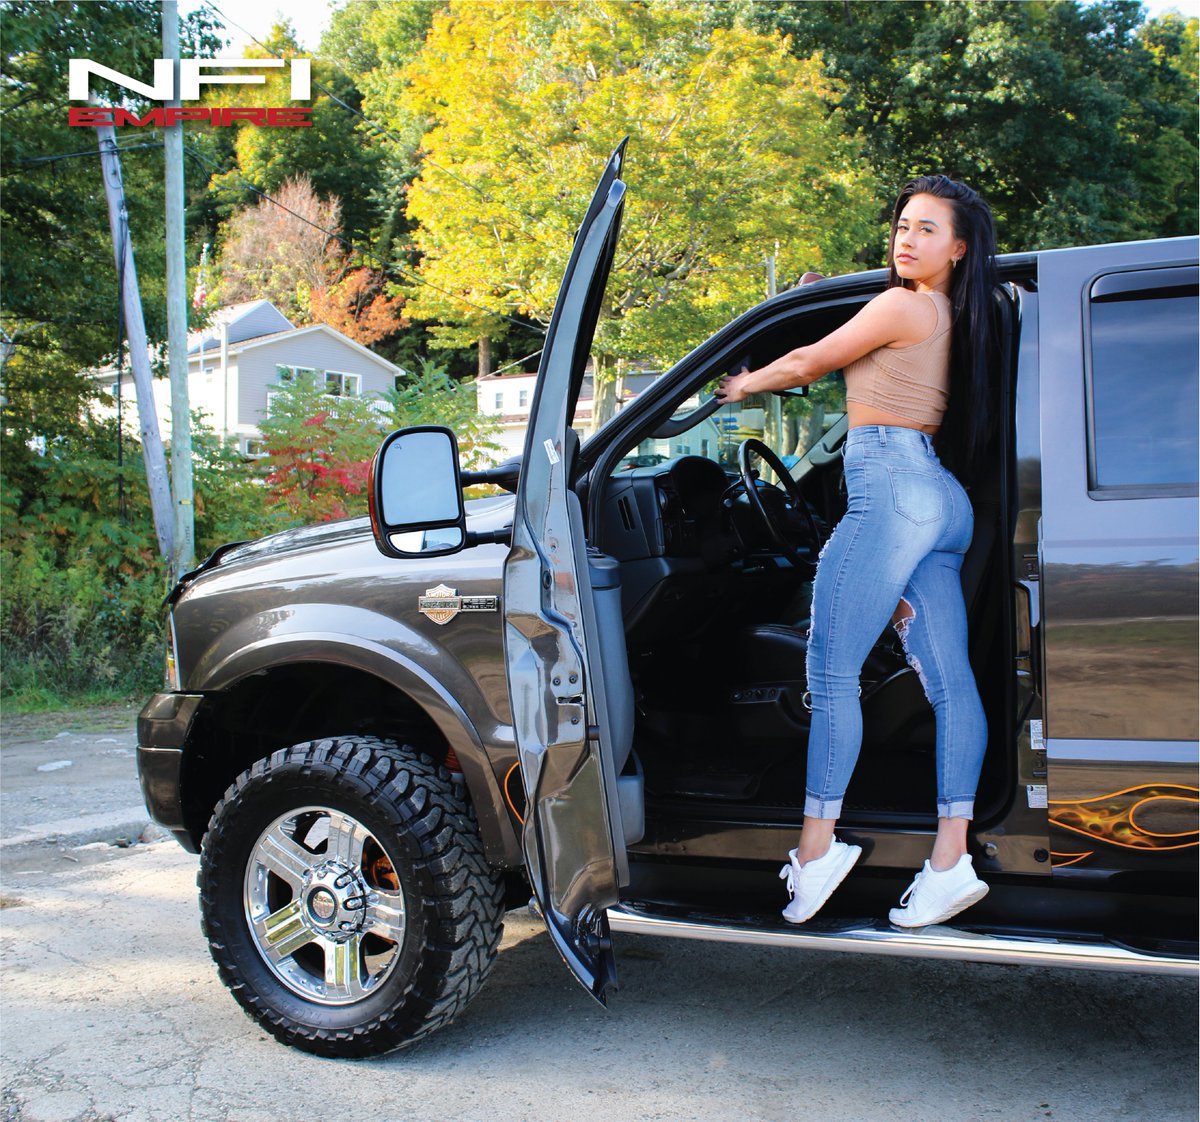 Happy Hump Day! Looking for a reliable 4x4 or AWD vehicle for the upcoming winter? Come checkout our selection of trucks, SUVs, and Jeeps.

NFIAutomotive.com

#diesel #powerstroke #model #fitnessmodel #fitgirl #truck #truckporn #nfiempire #nfimodels #dieselbabe